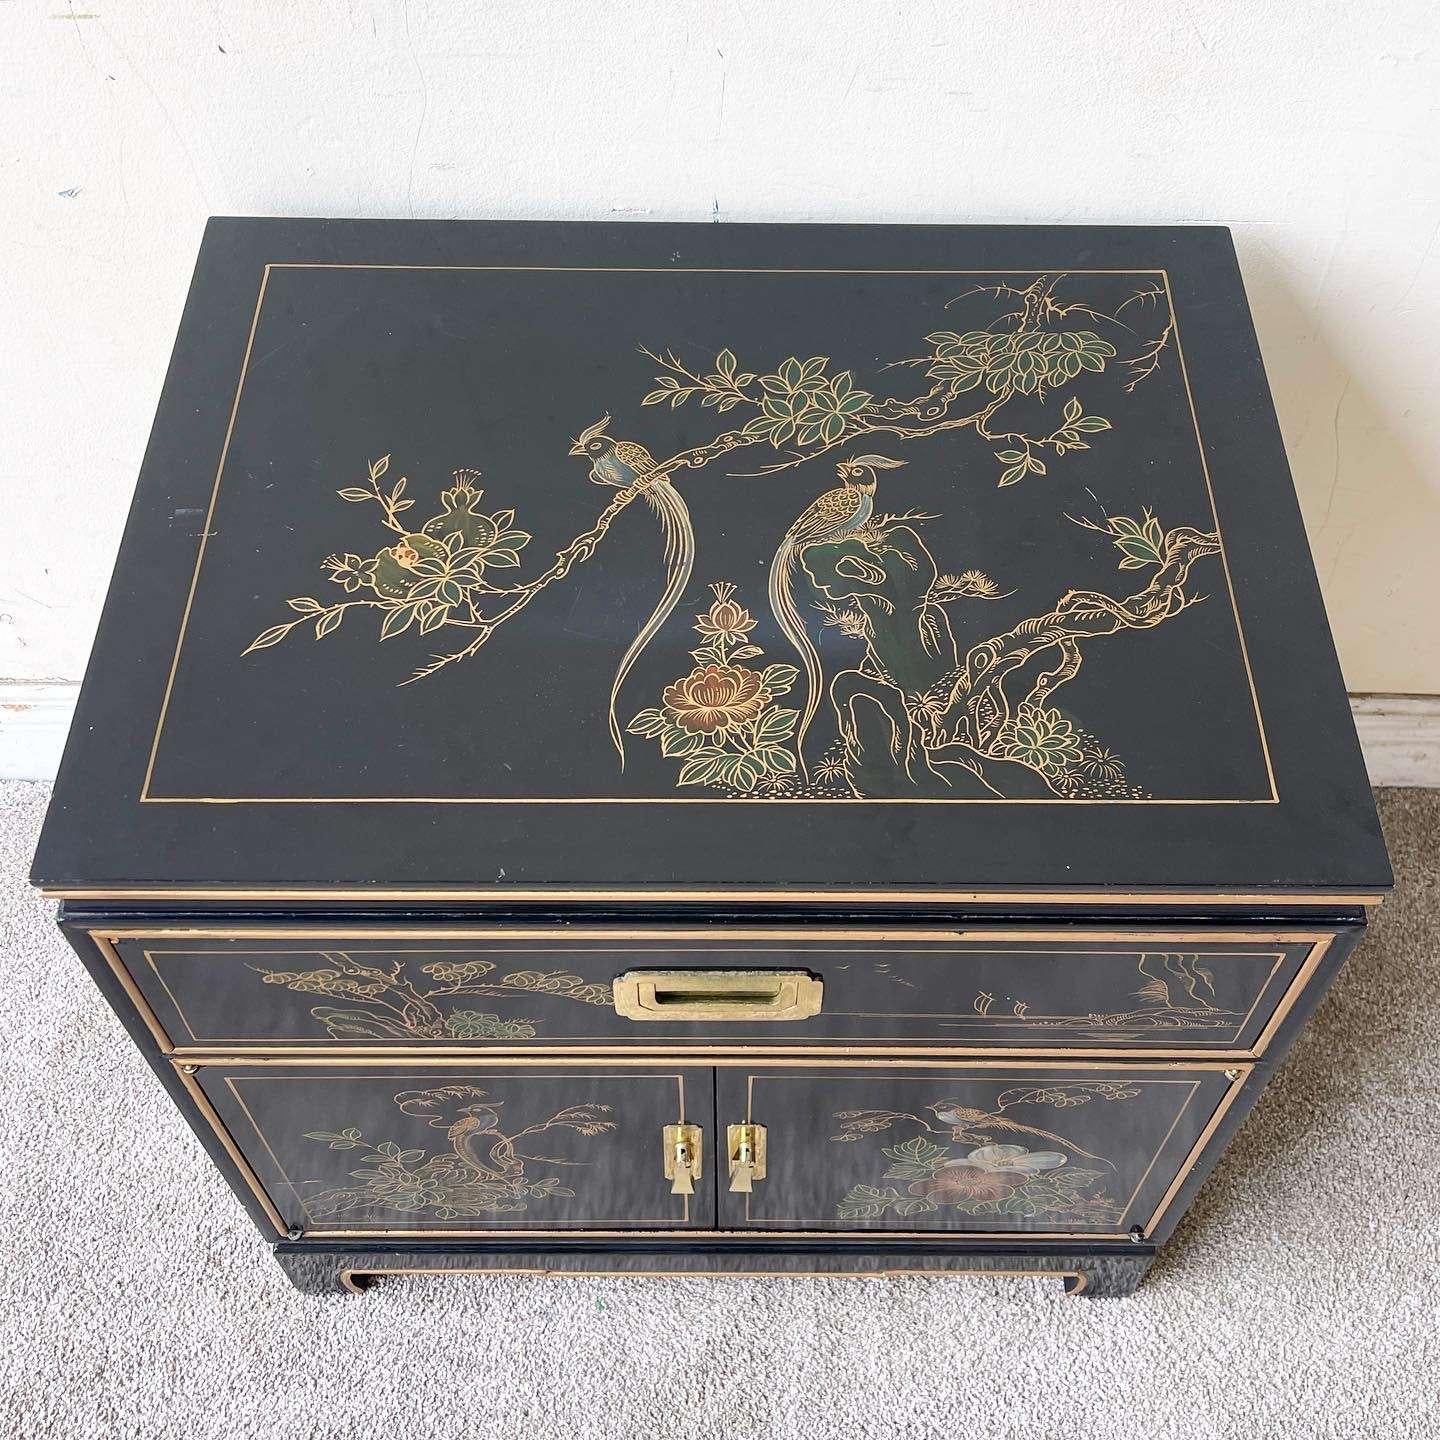 Amazing vintage Chinese end table/nightstand. Features a black lacquered finish with gold accents and brass handles.
